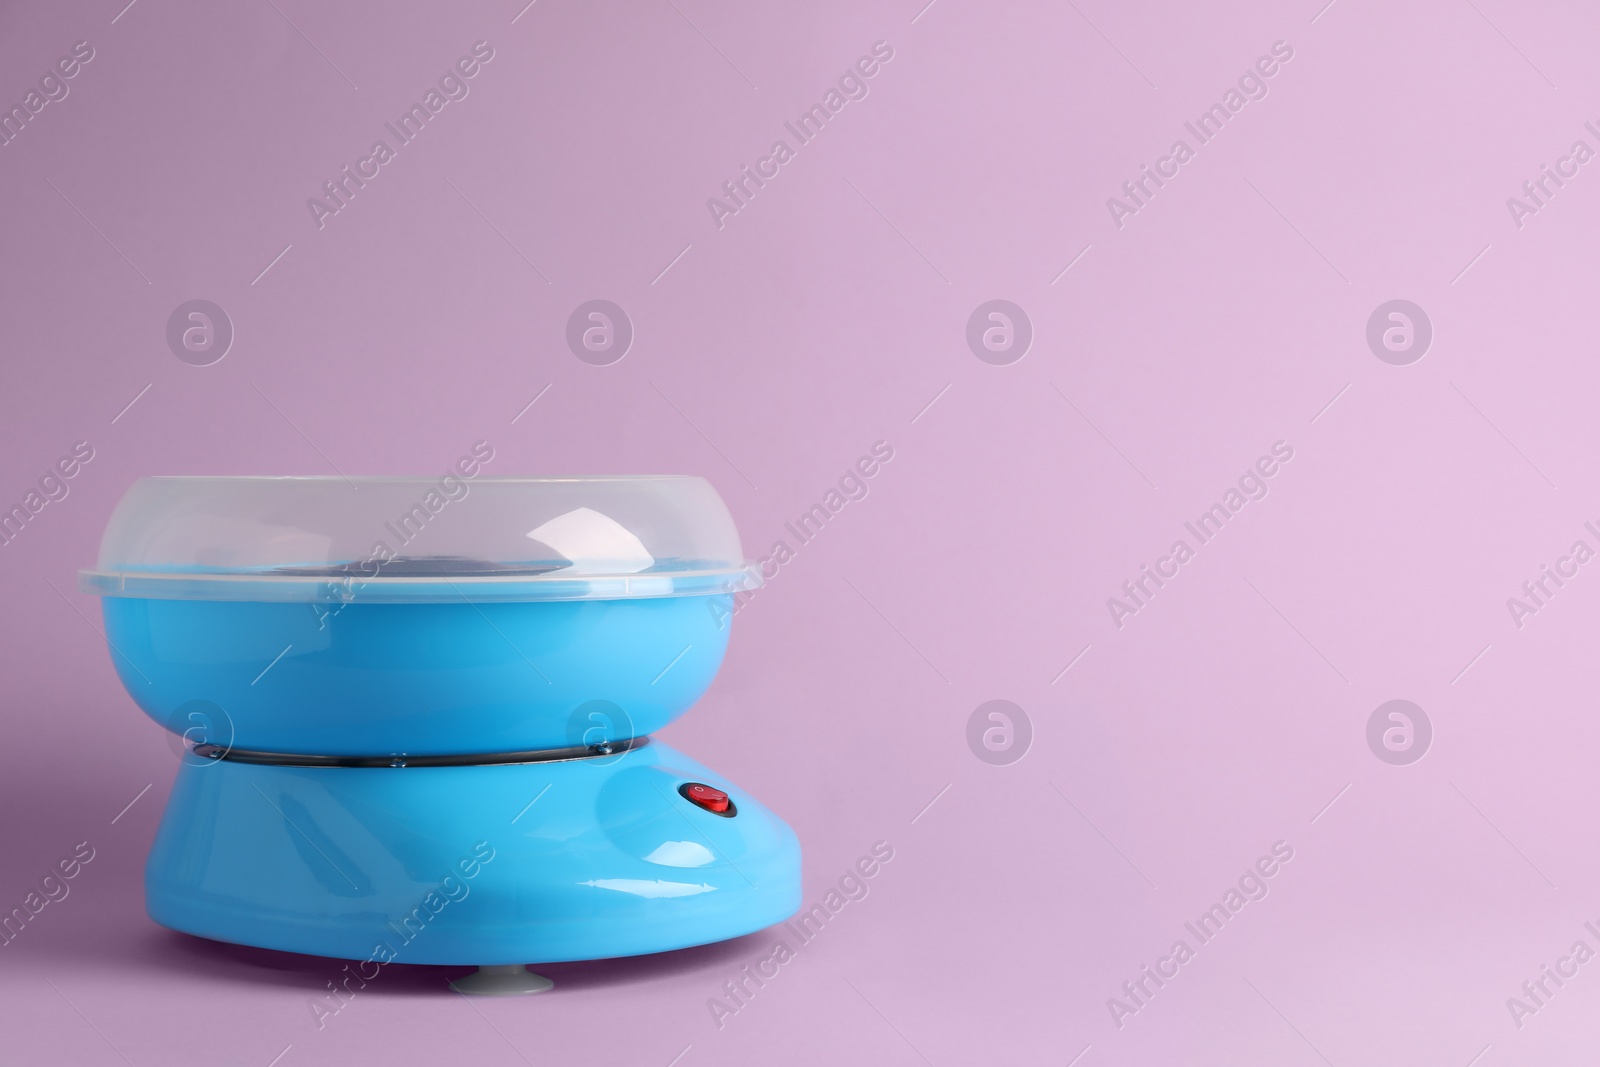 Photo of Portable candy cotton machine on violet background, space for text